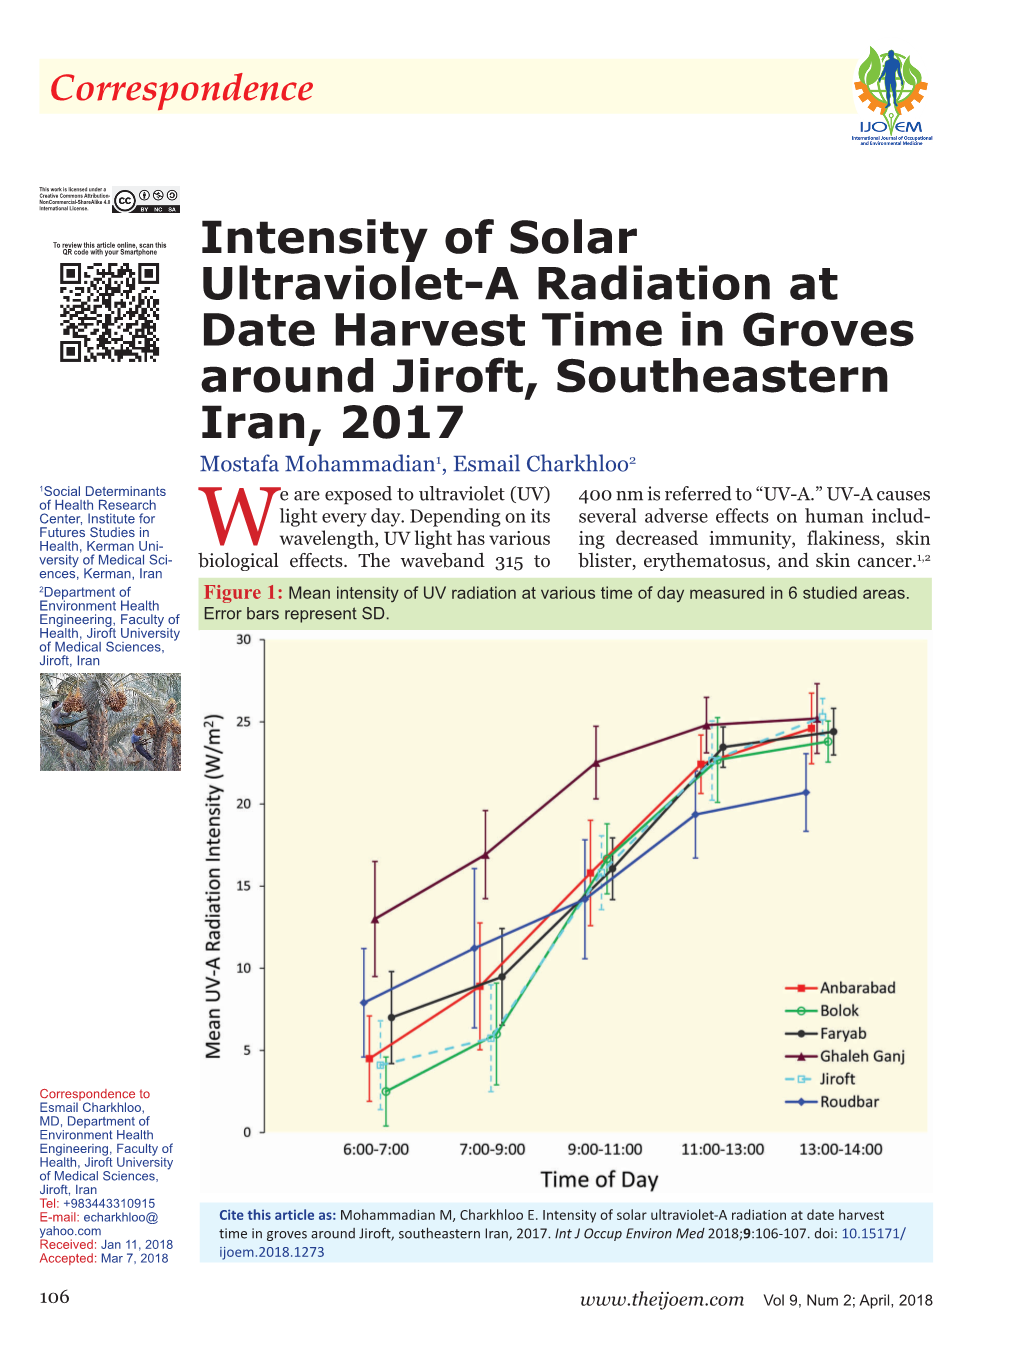 Intensity of Solar Ultraviolet-A Radiation at Date Harvest Time In